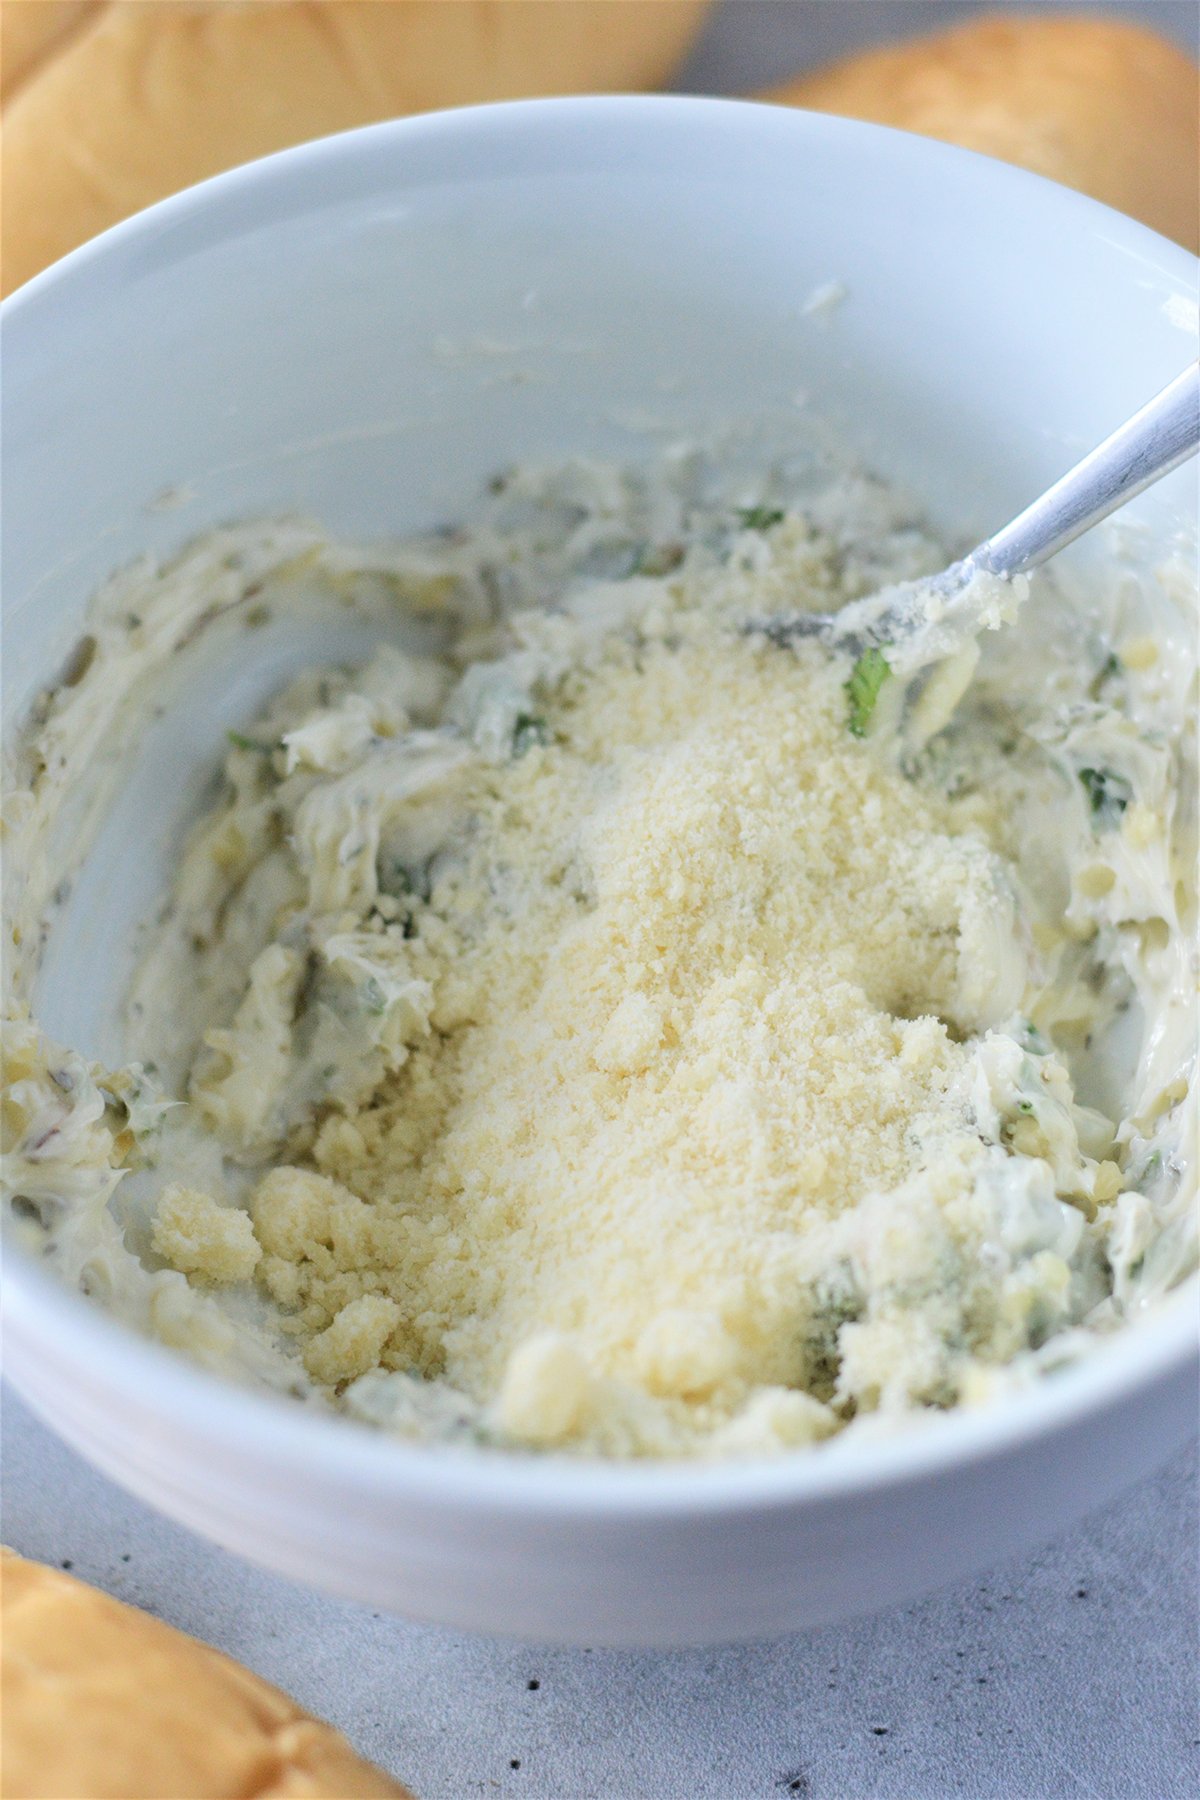 butter, parmesan cheese, herbs, minced garlic mixture in a white bowl